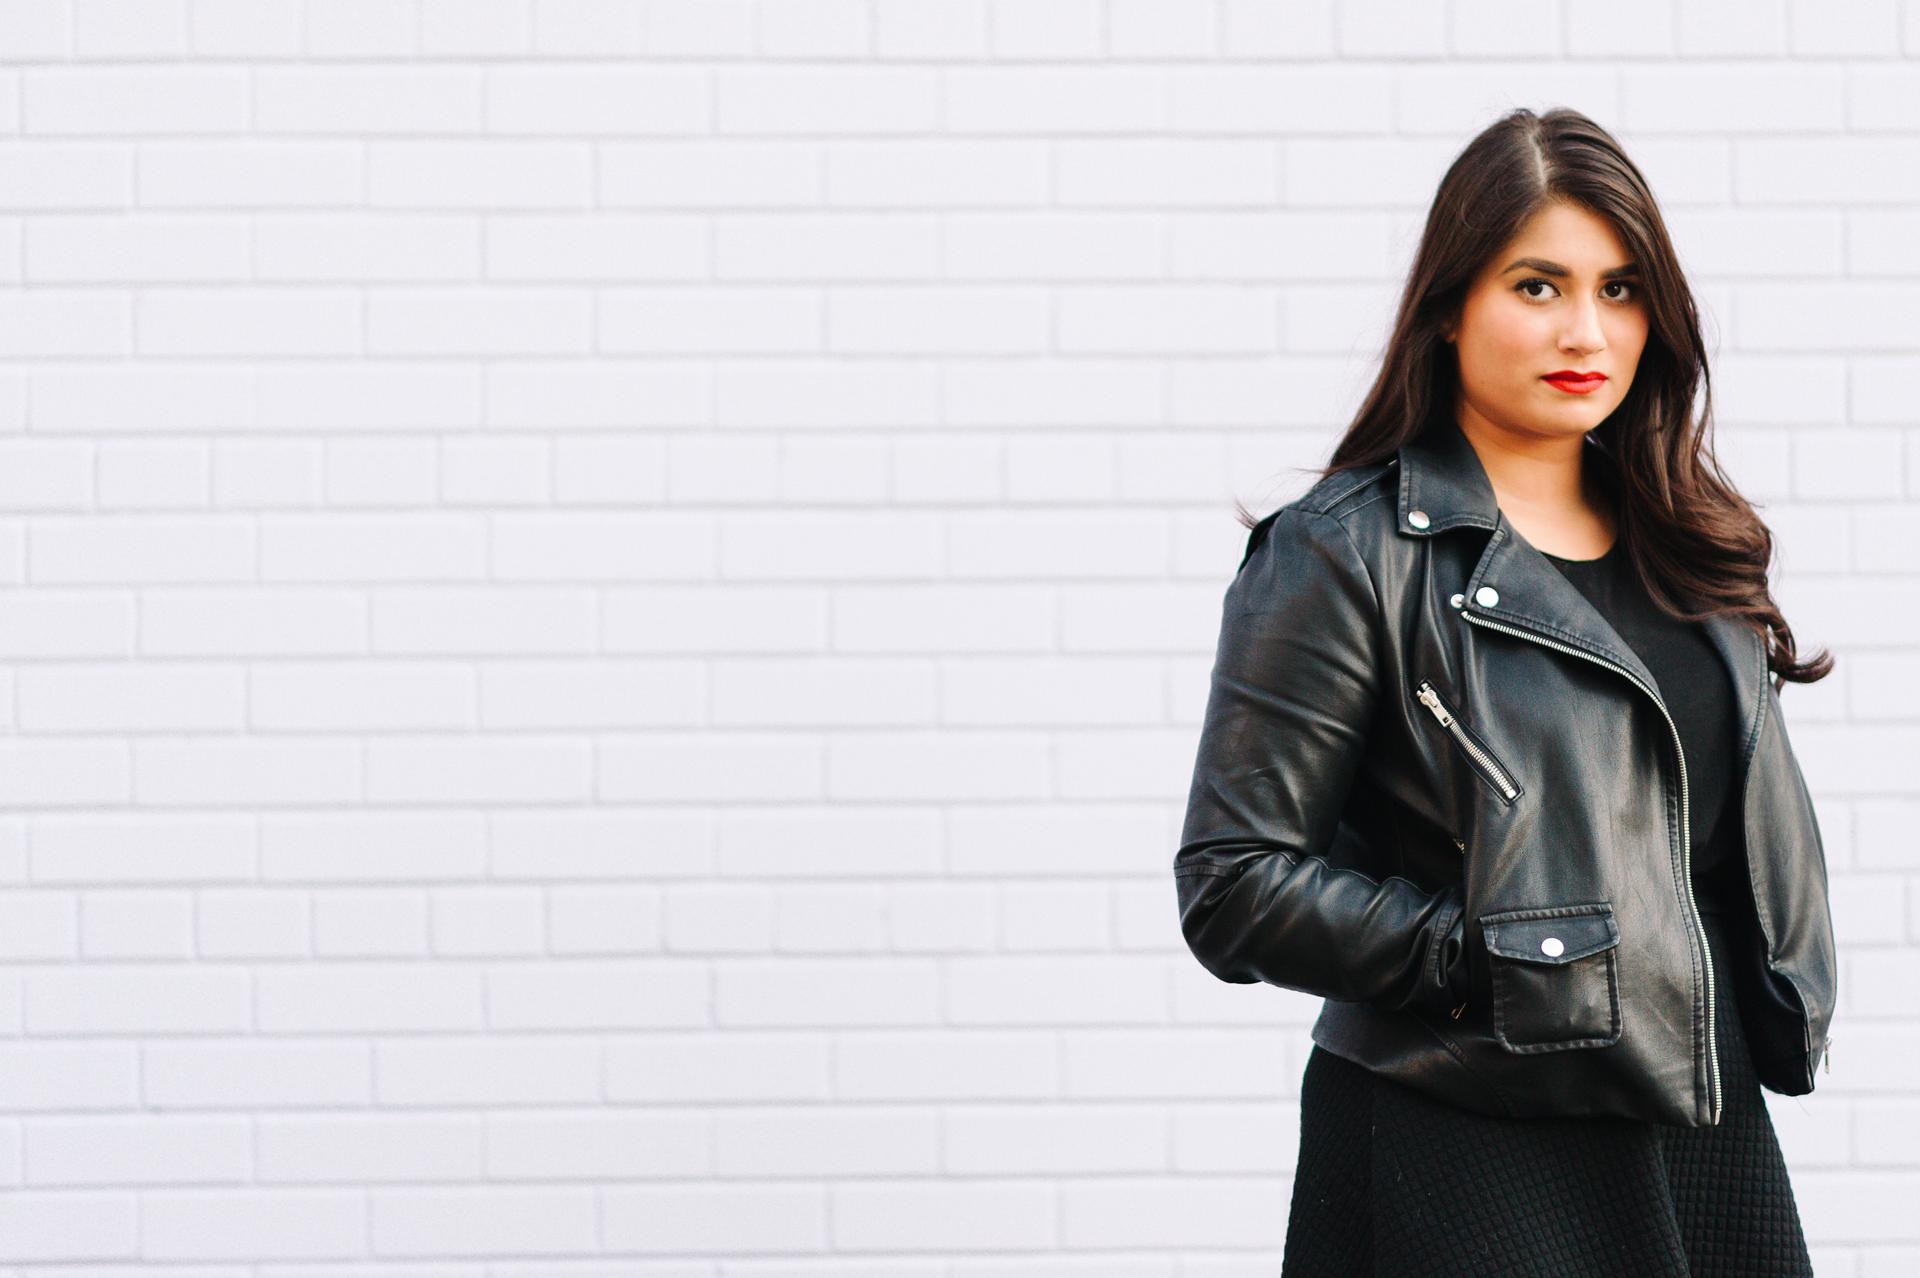 Author Scaachi Koul was born and raised in Calgary, Alberta and is a culture writer at BuzzFeed.